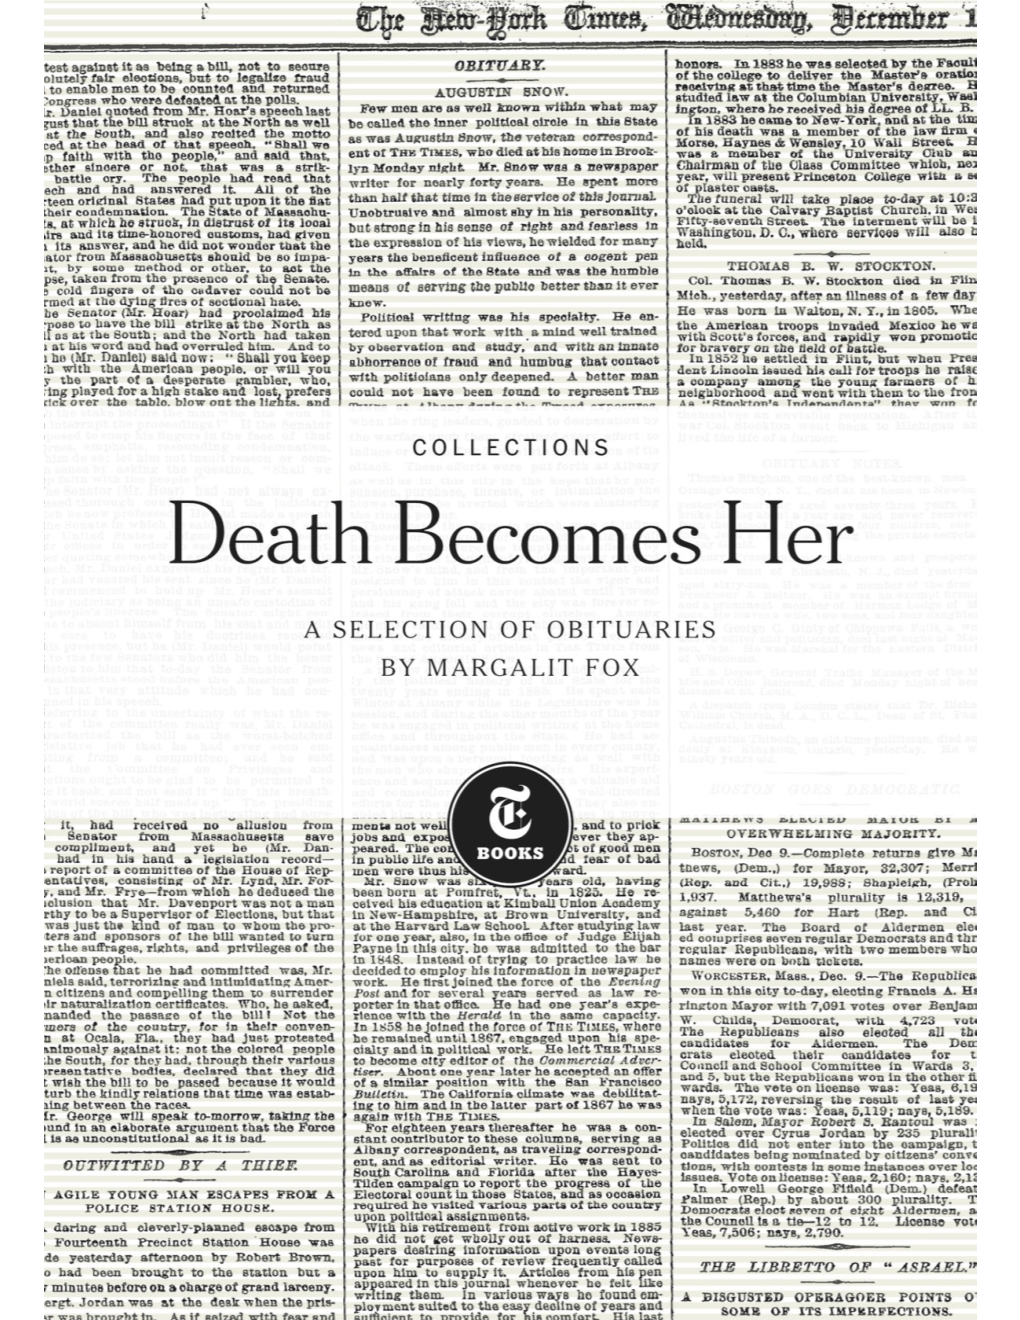 DEATH BECOMES HER: a SELECTION of OBITUARIES by MARGALIT FOX Tbook Collections